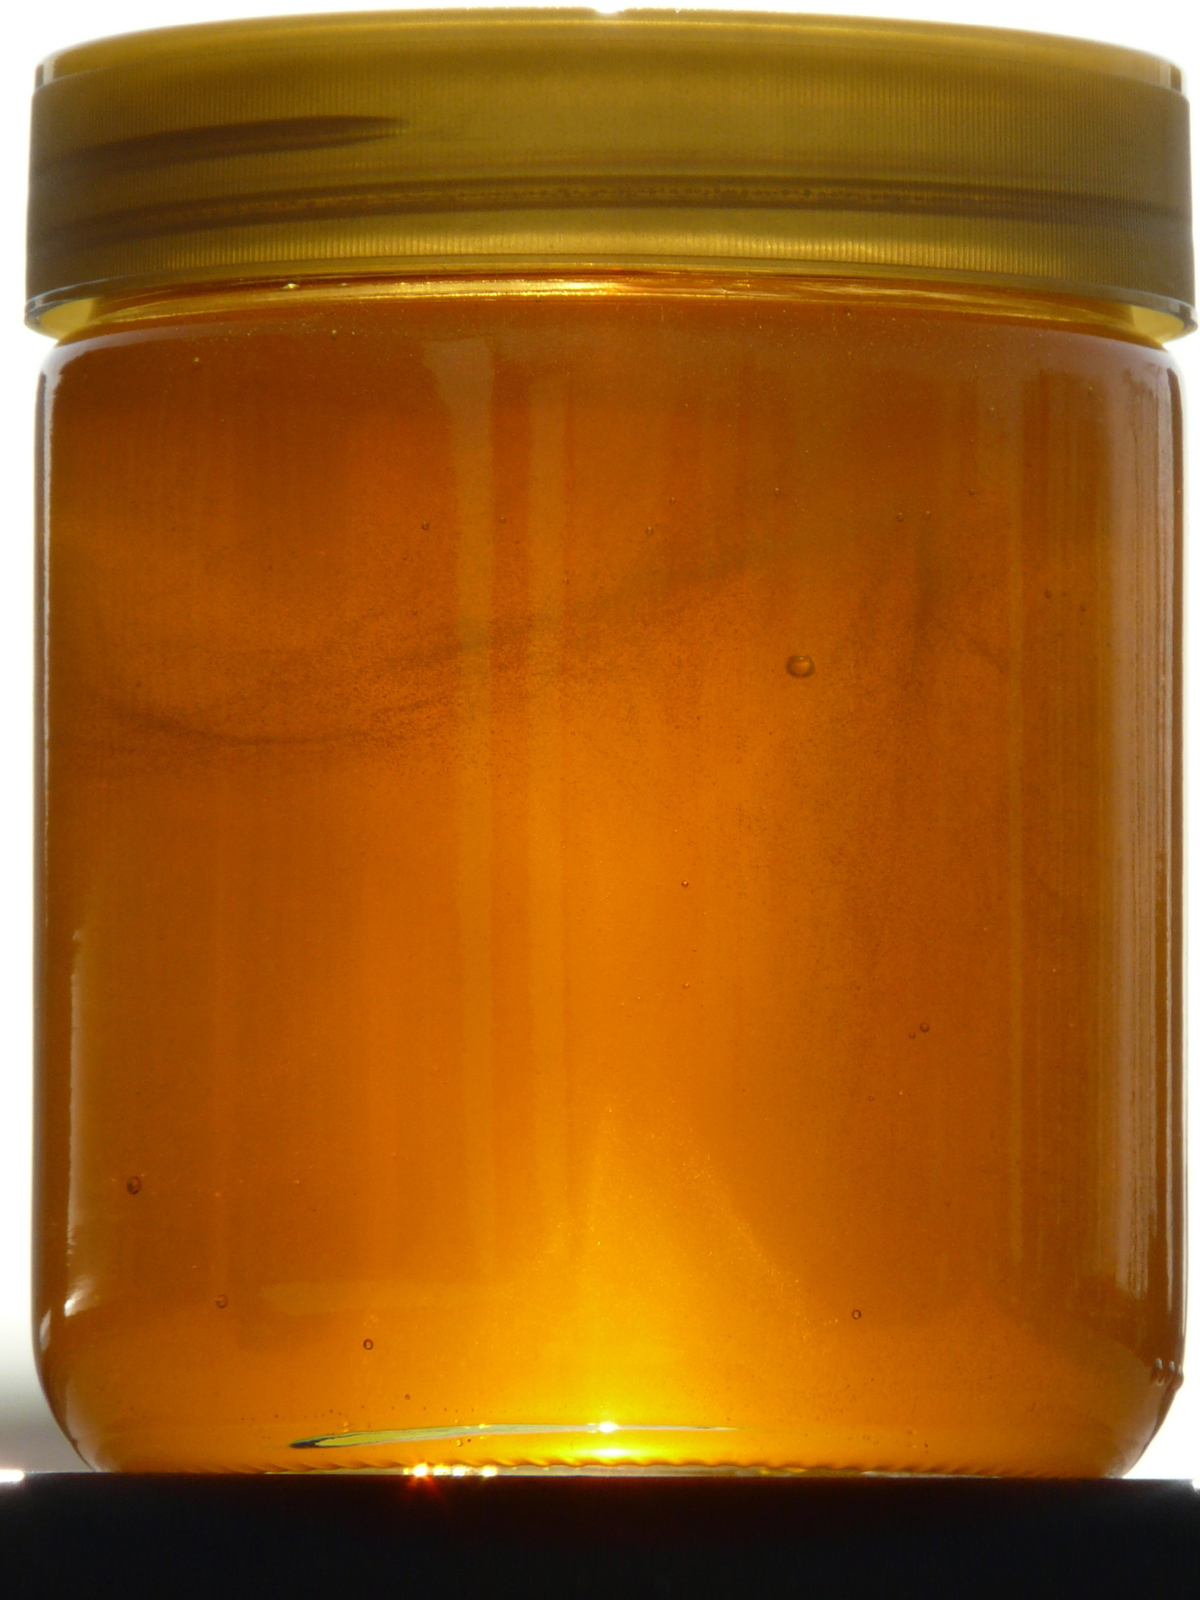 Why Everyone Should Always Keep a Jar of Honey at Home